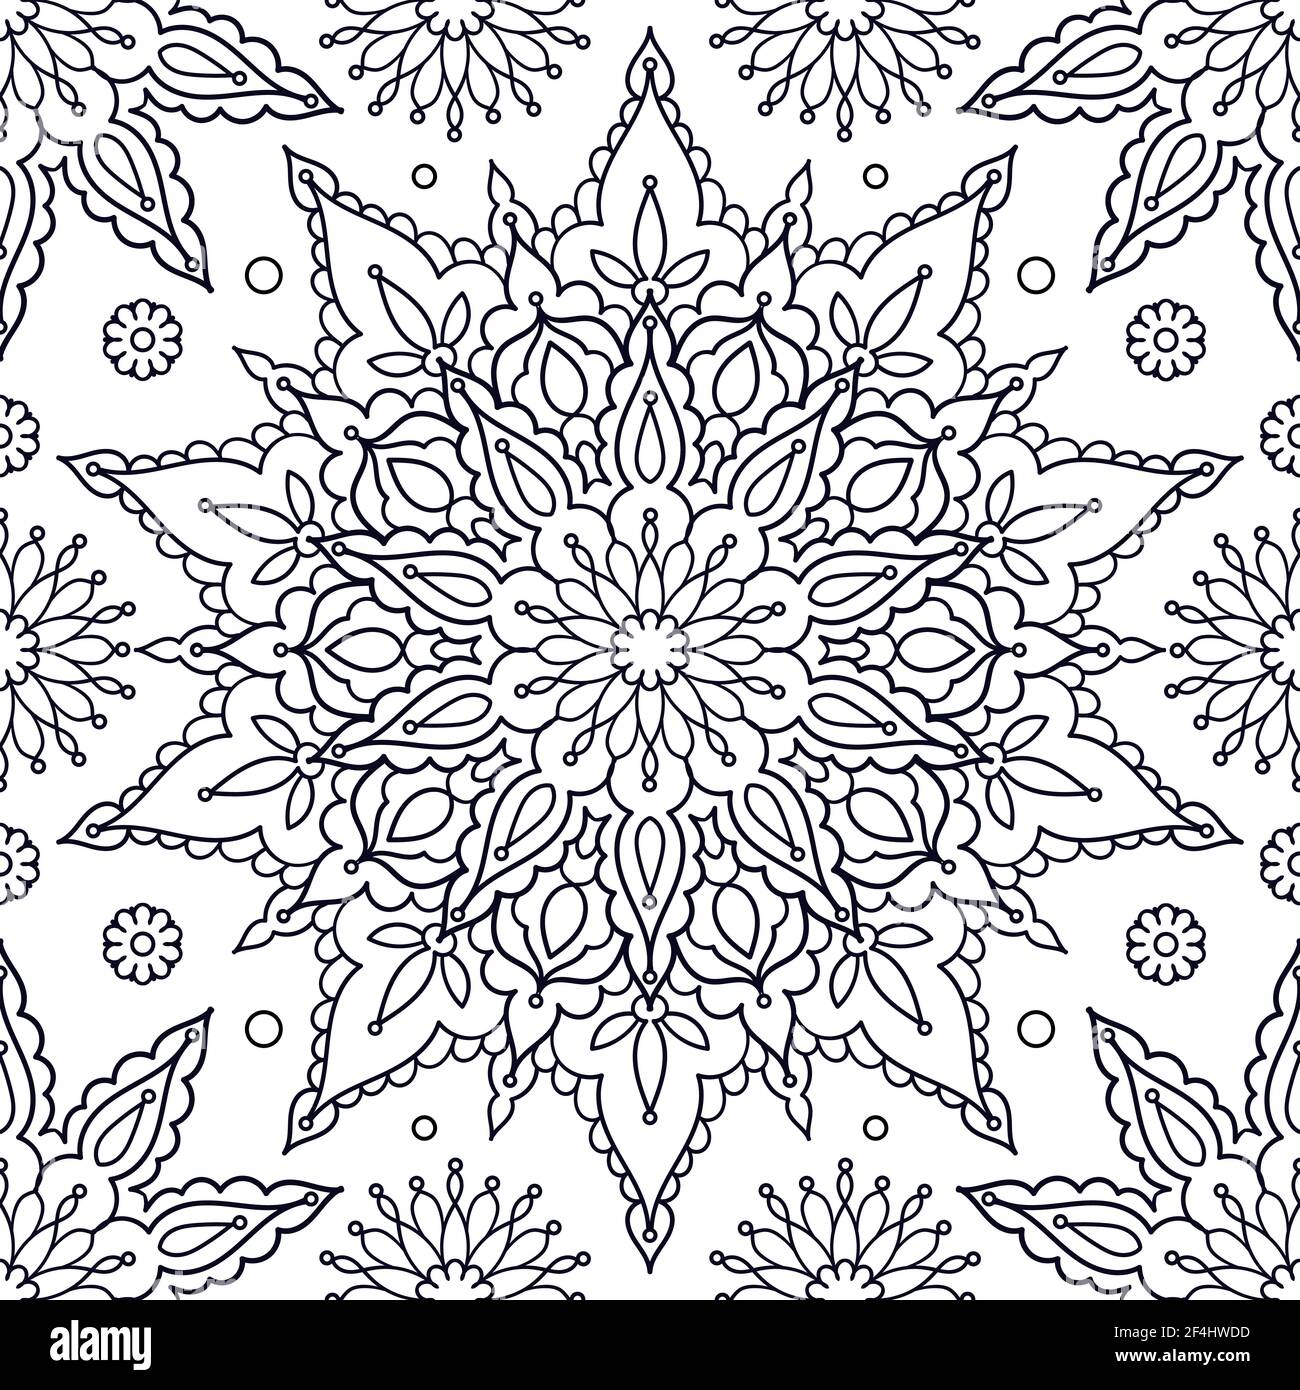 Seamless pattern with mandala. Black and white linear image. Doodle style. For coloring, fabric design, wallpaper, backgrounds, postcards, prints. Vec Stock Vector